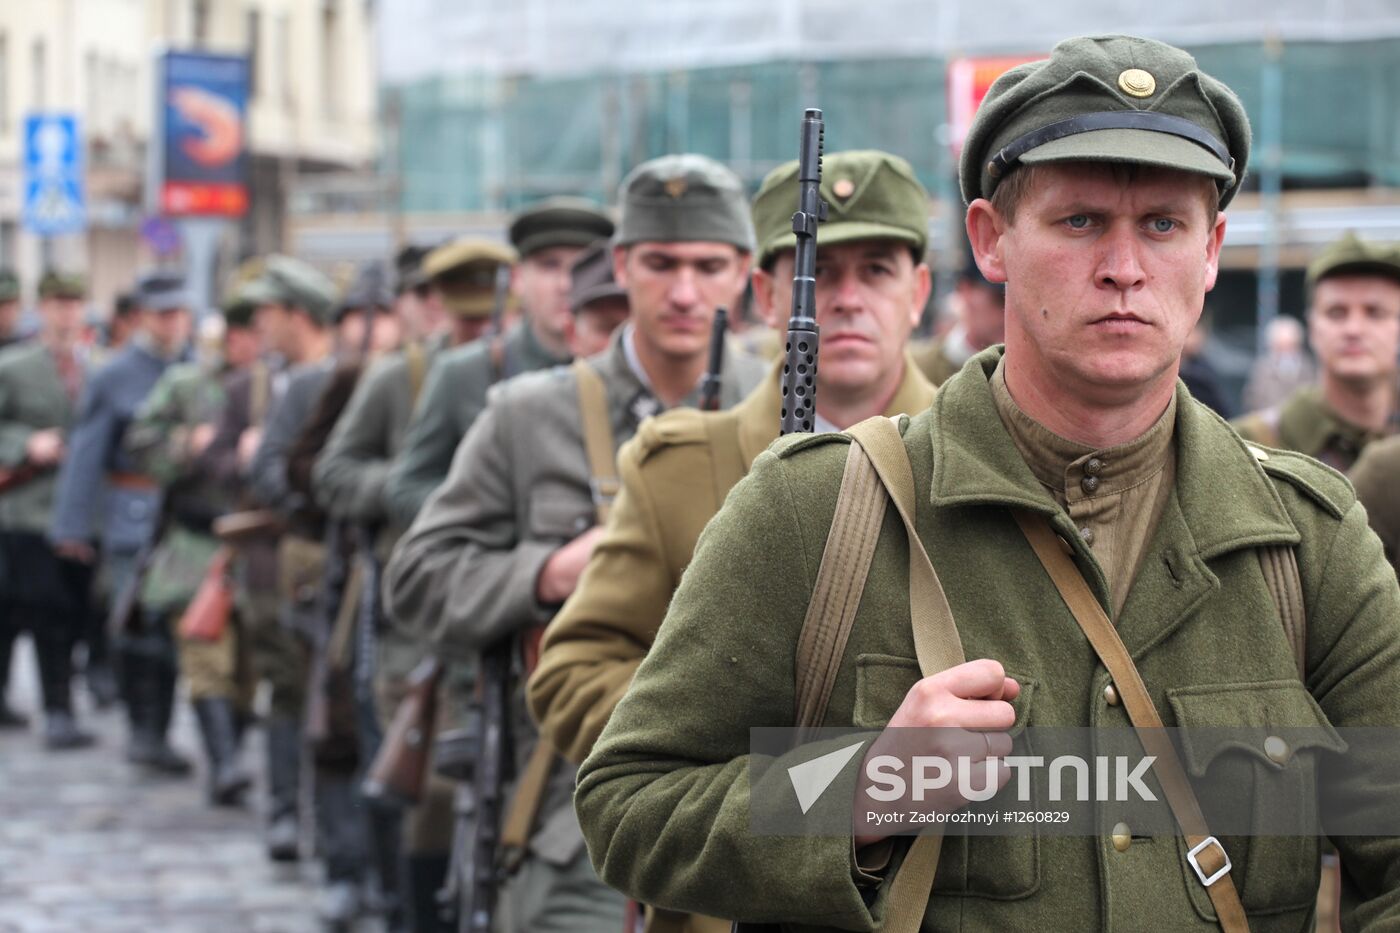 March to mark 70th anniversary of Ukrainian Insurgent Army